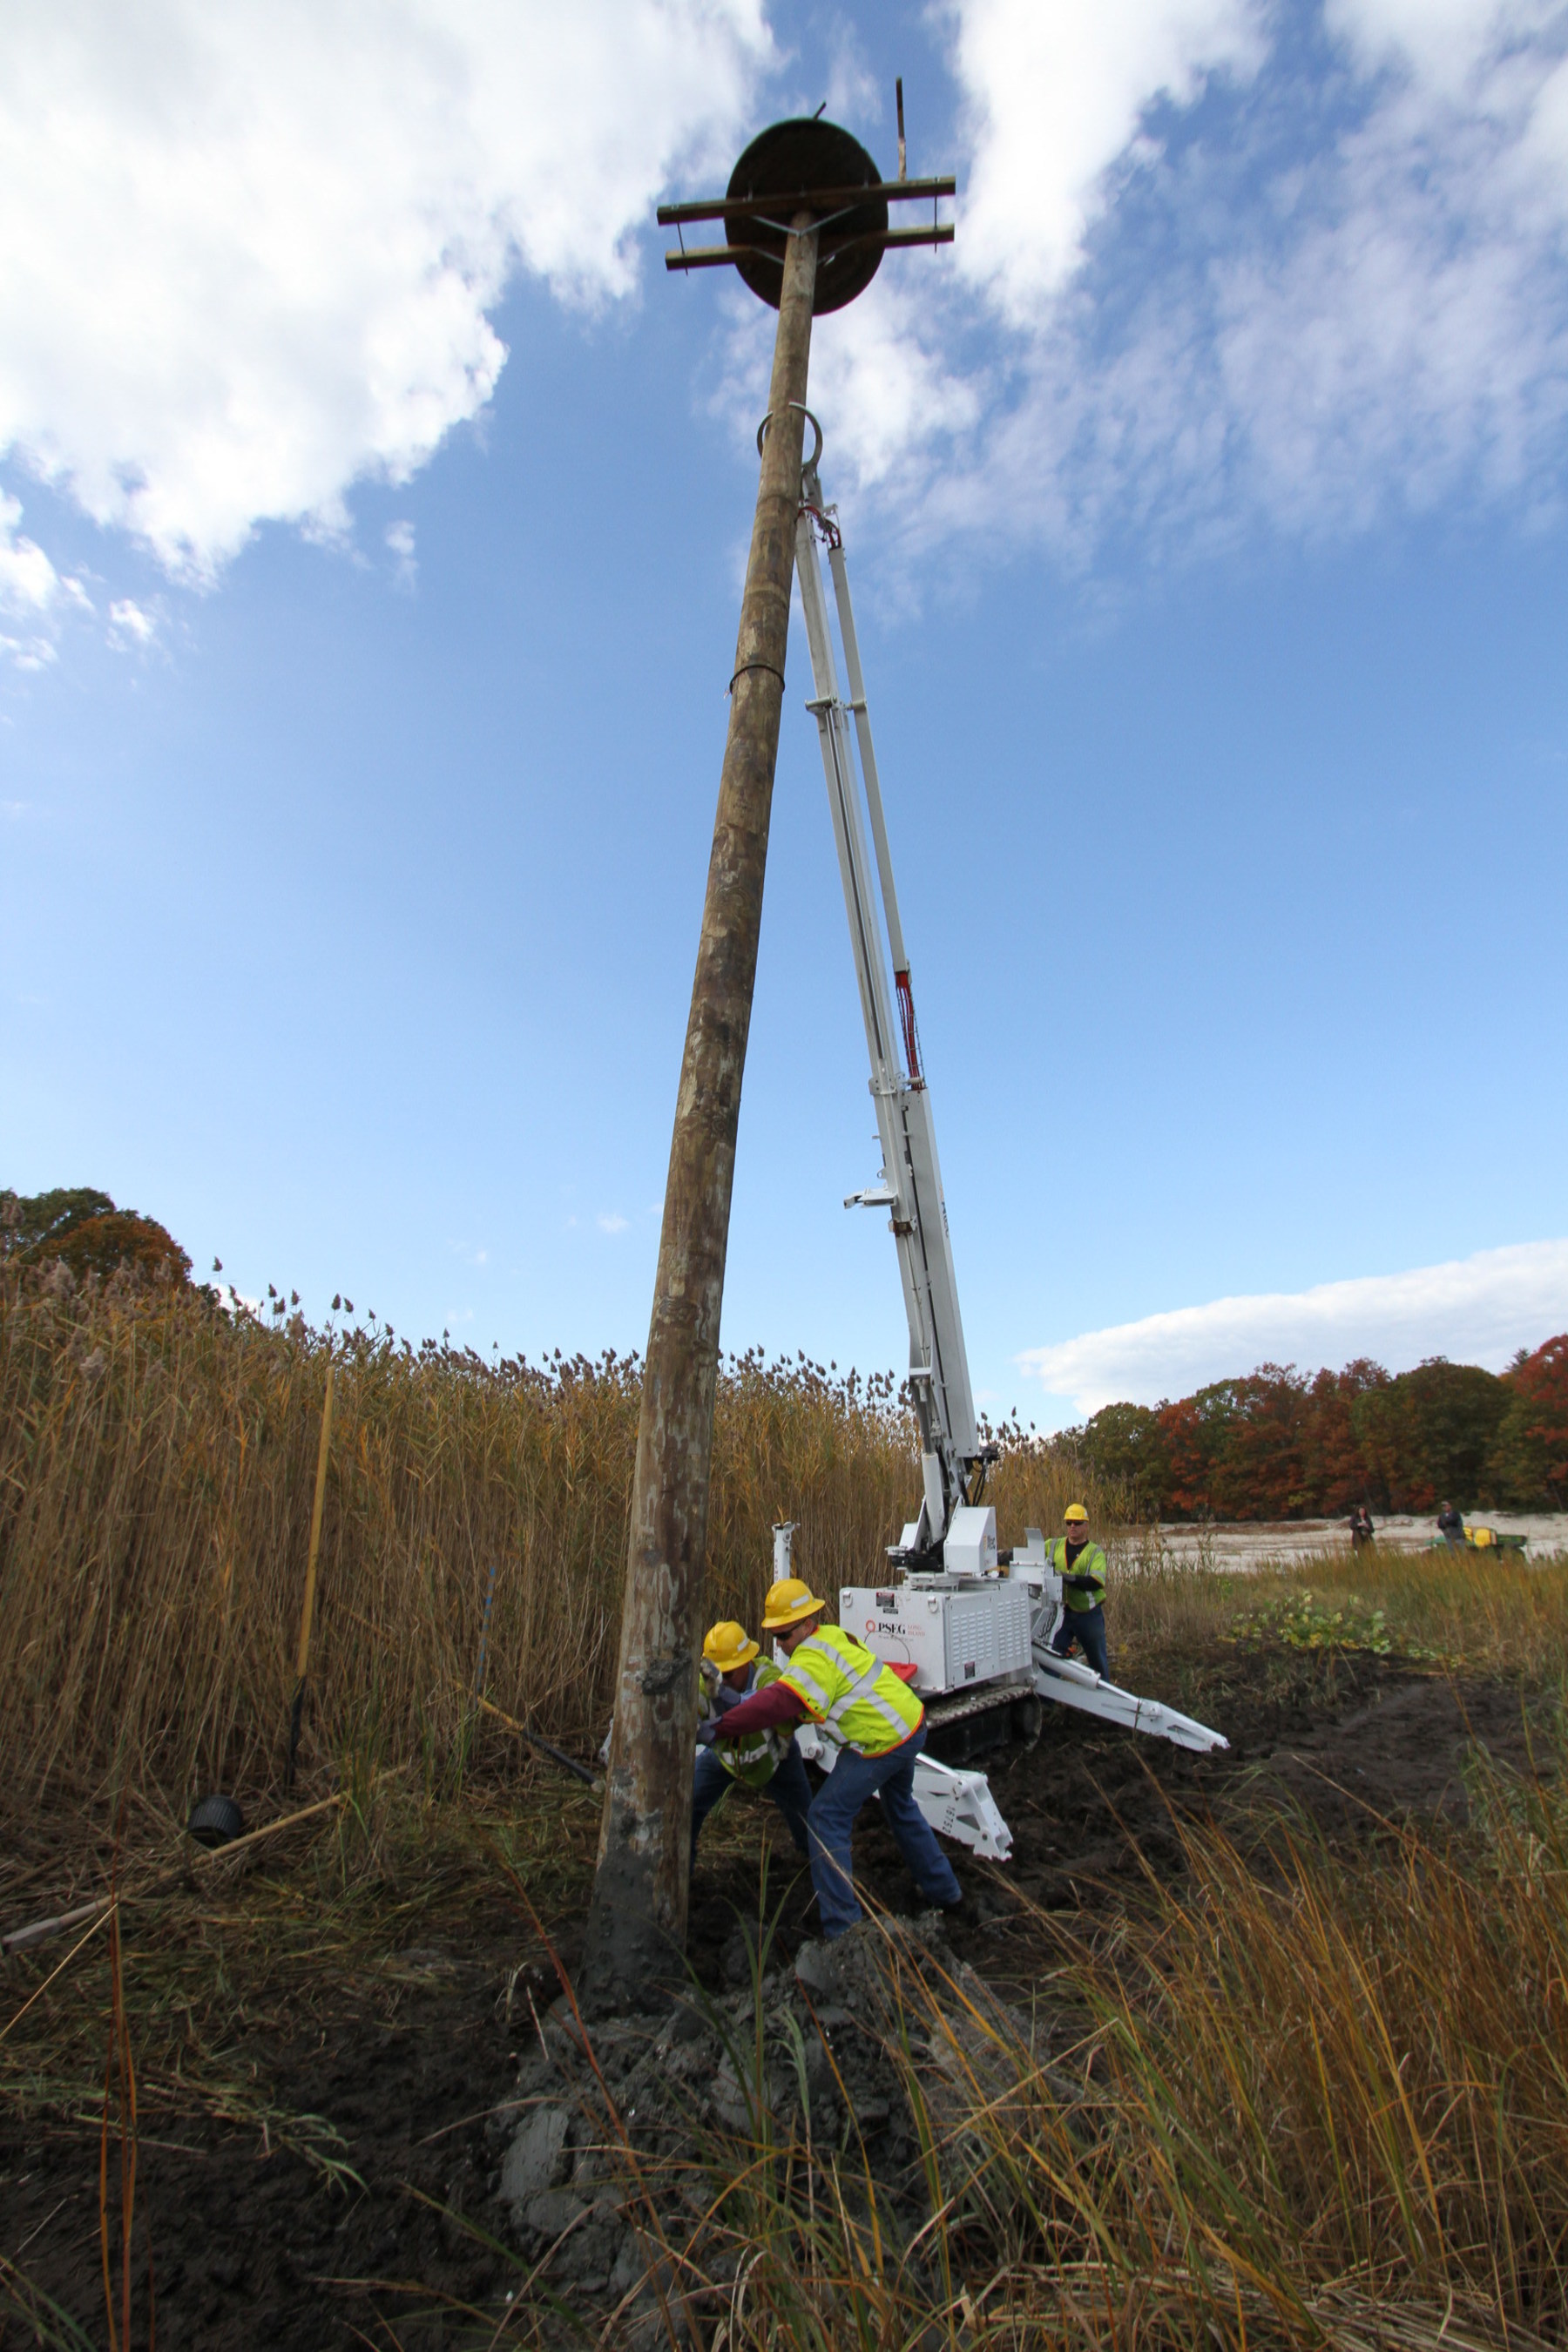 PSEG Long Island replaces a damaged osprey pole and platform in Nissequogue River State Park, Kings Park, NY. The new structure will provide a safe nesting area for the osprey away from vital electrical infrastructure, helping PSEG Long Island maintain strong electric service reliability.